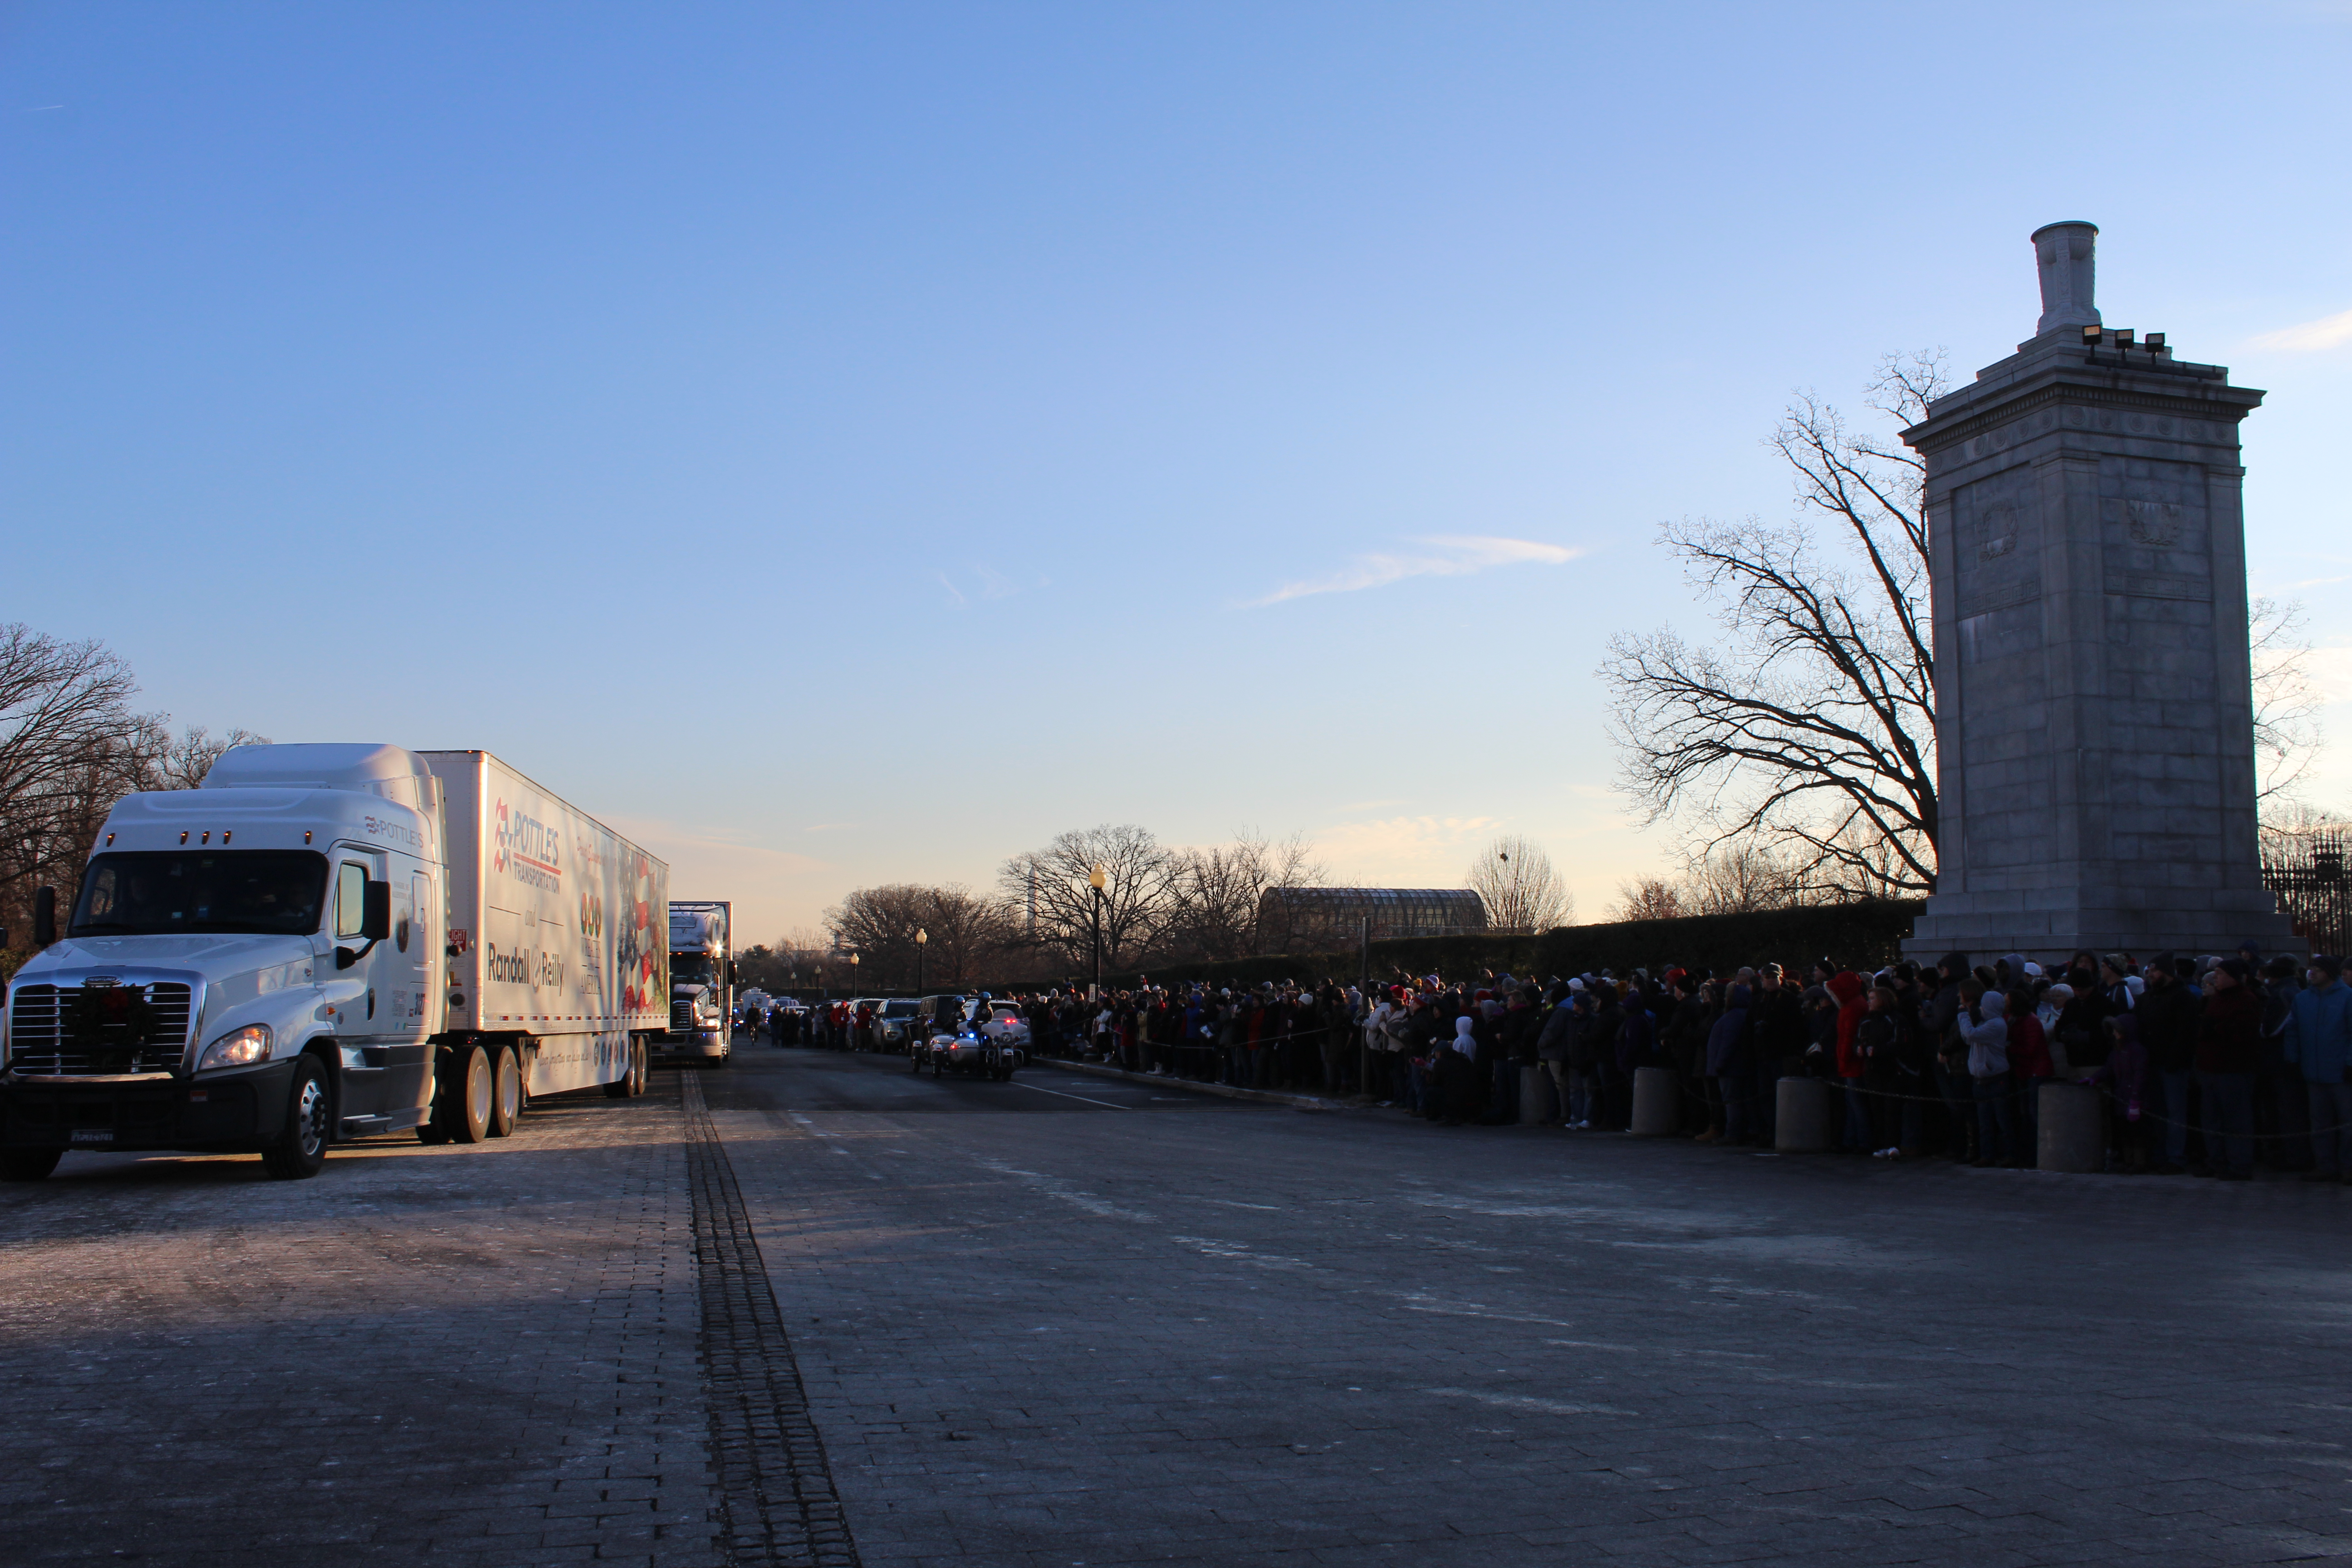 Trucks Bring In Wreaths For Wreaths Across America (Julia Nista/The Daily Caller)